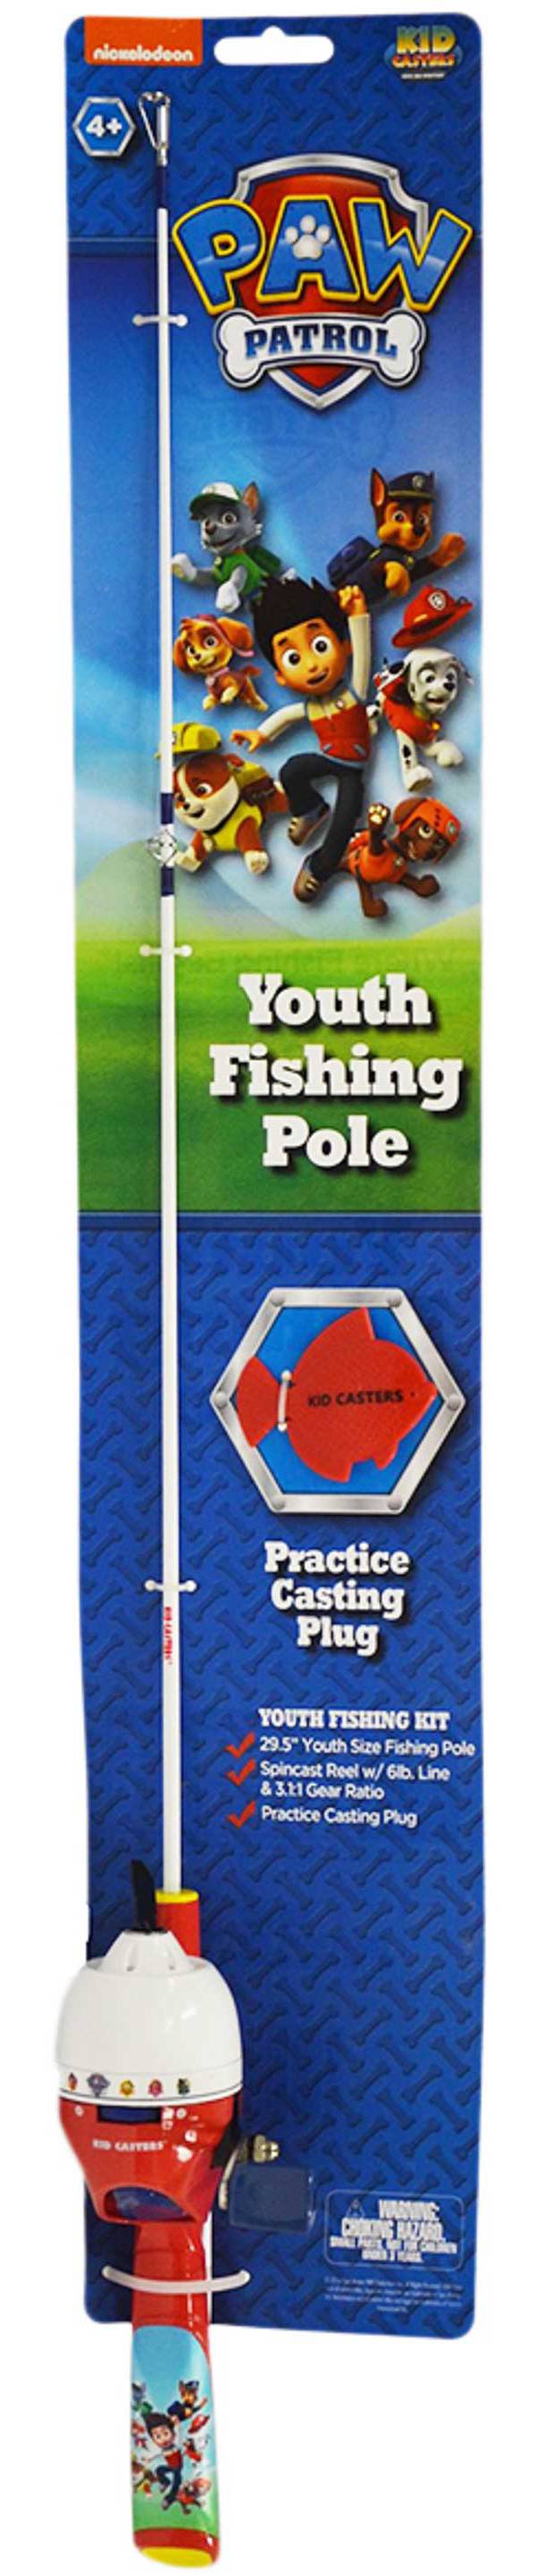 Perfekt Forkæle cigar Lil' Anglers Paw Patrol Youth Fishing Kit | DICK'S Sporting Goods